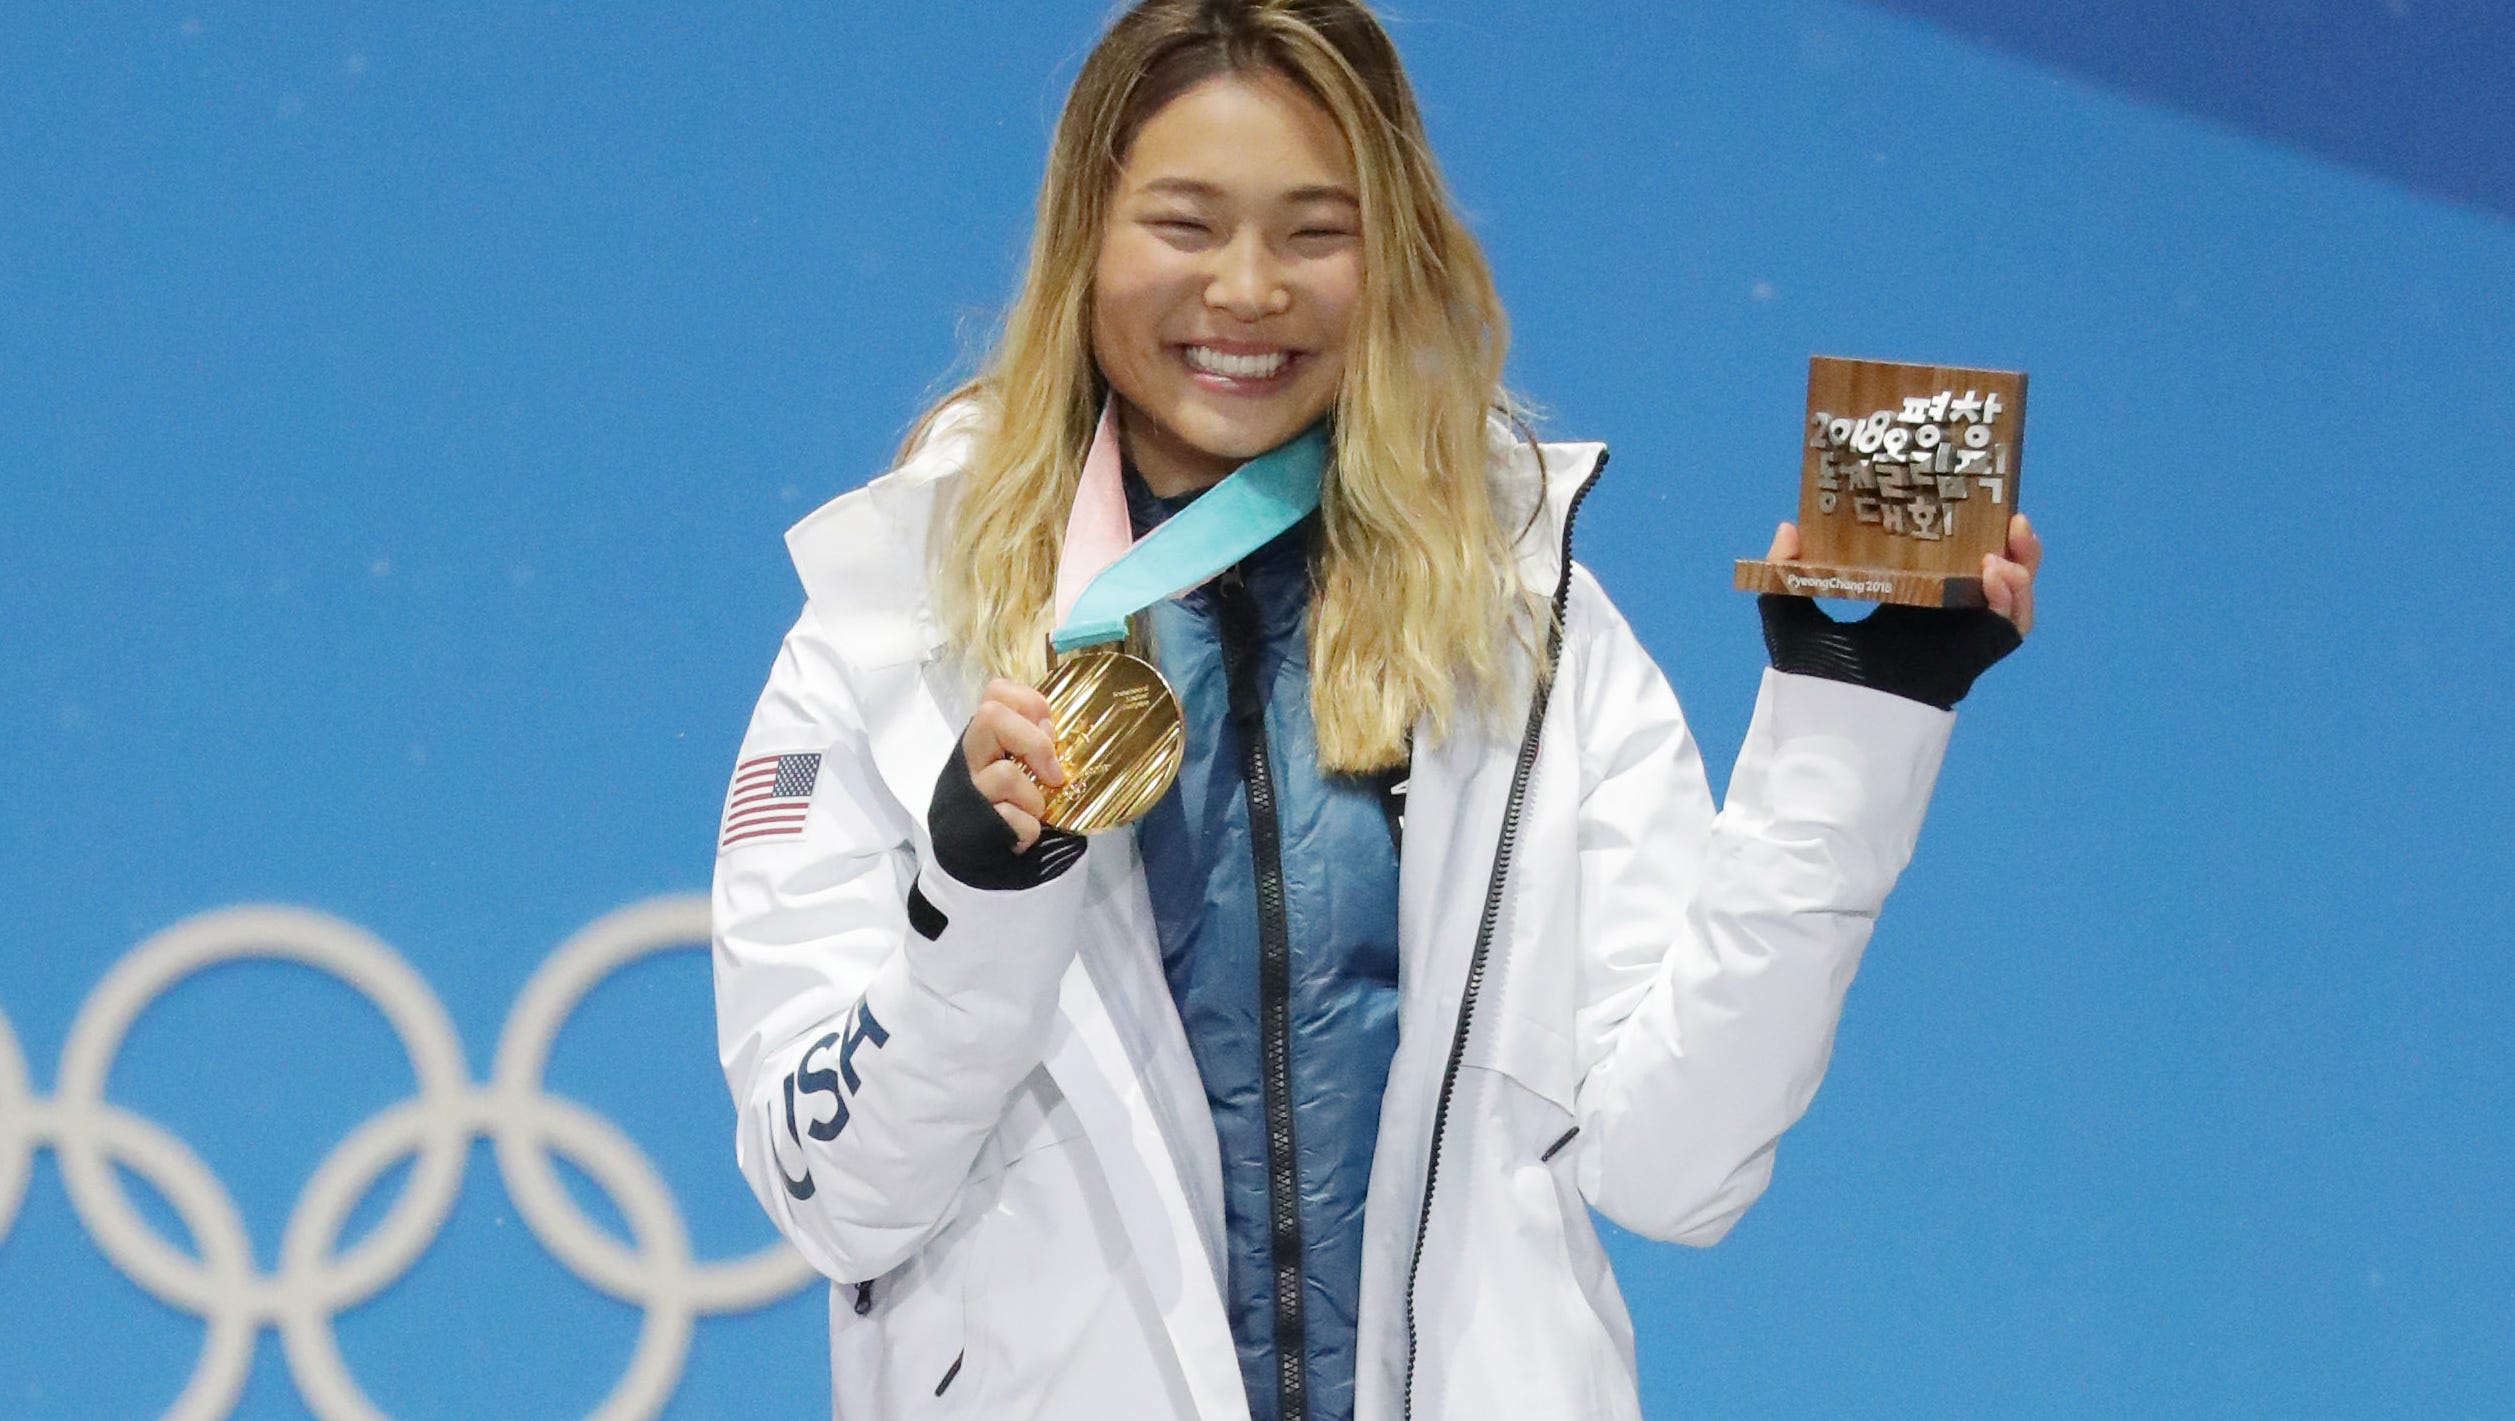 Chloe Kim poised to fullblown star after winning Olympic gold